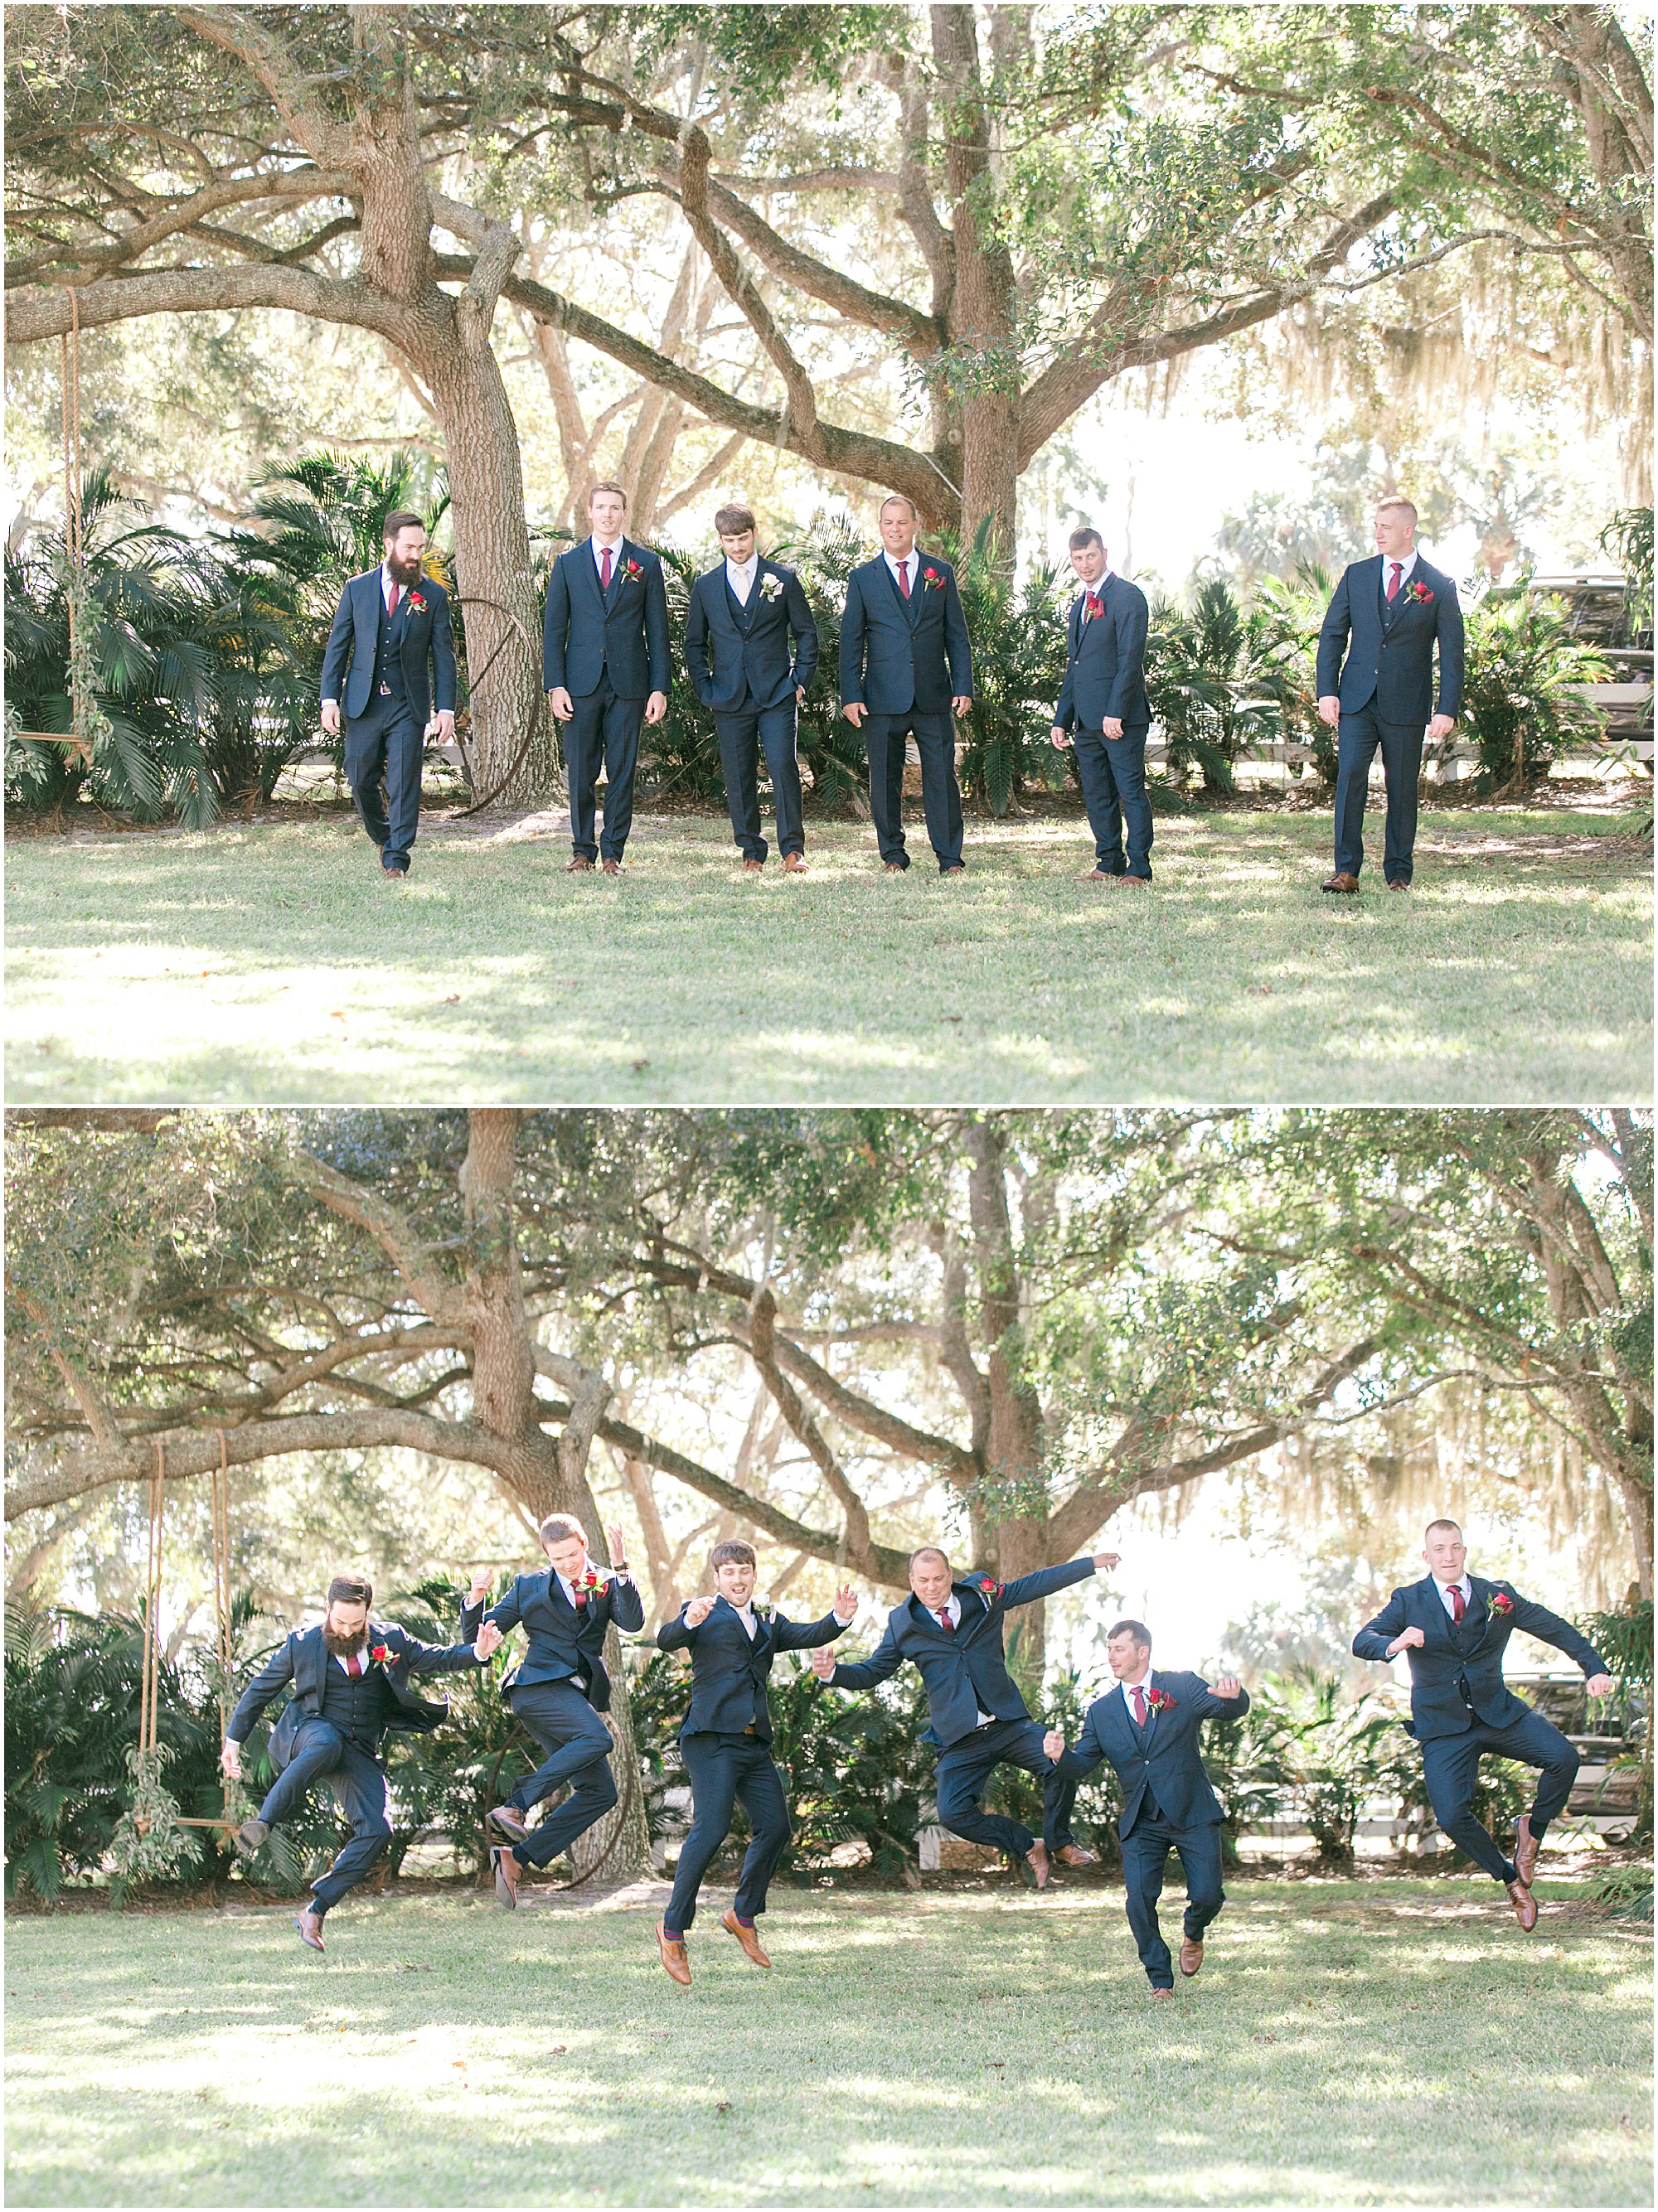 Groomsmen taking photos and jumping in the air